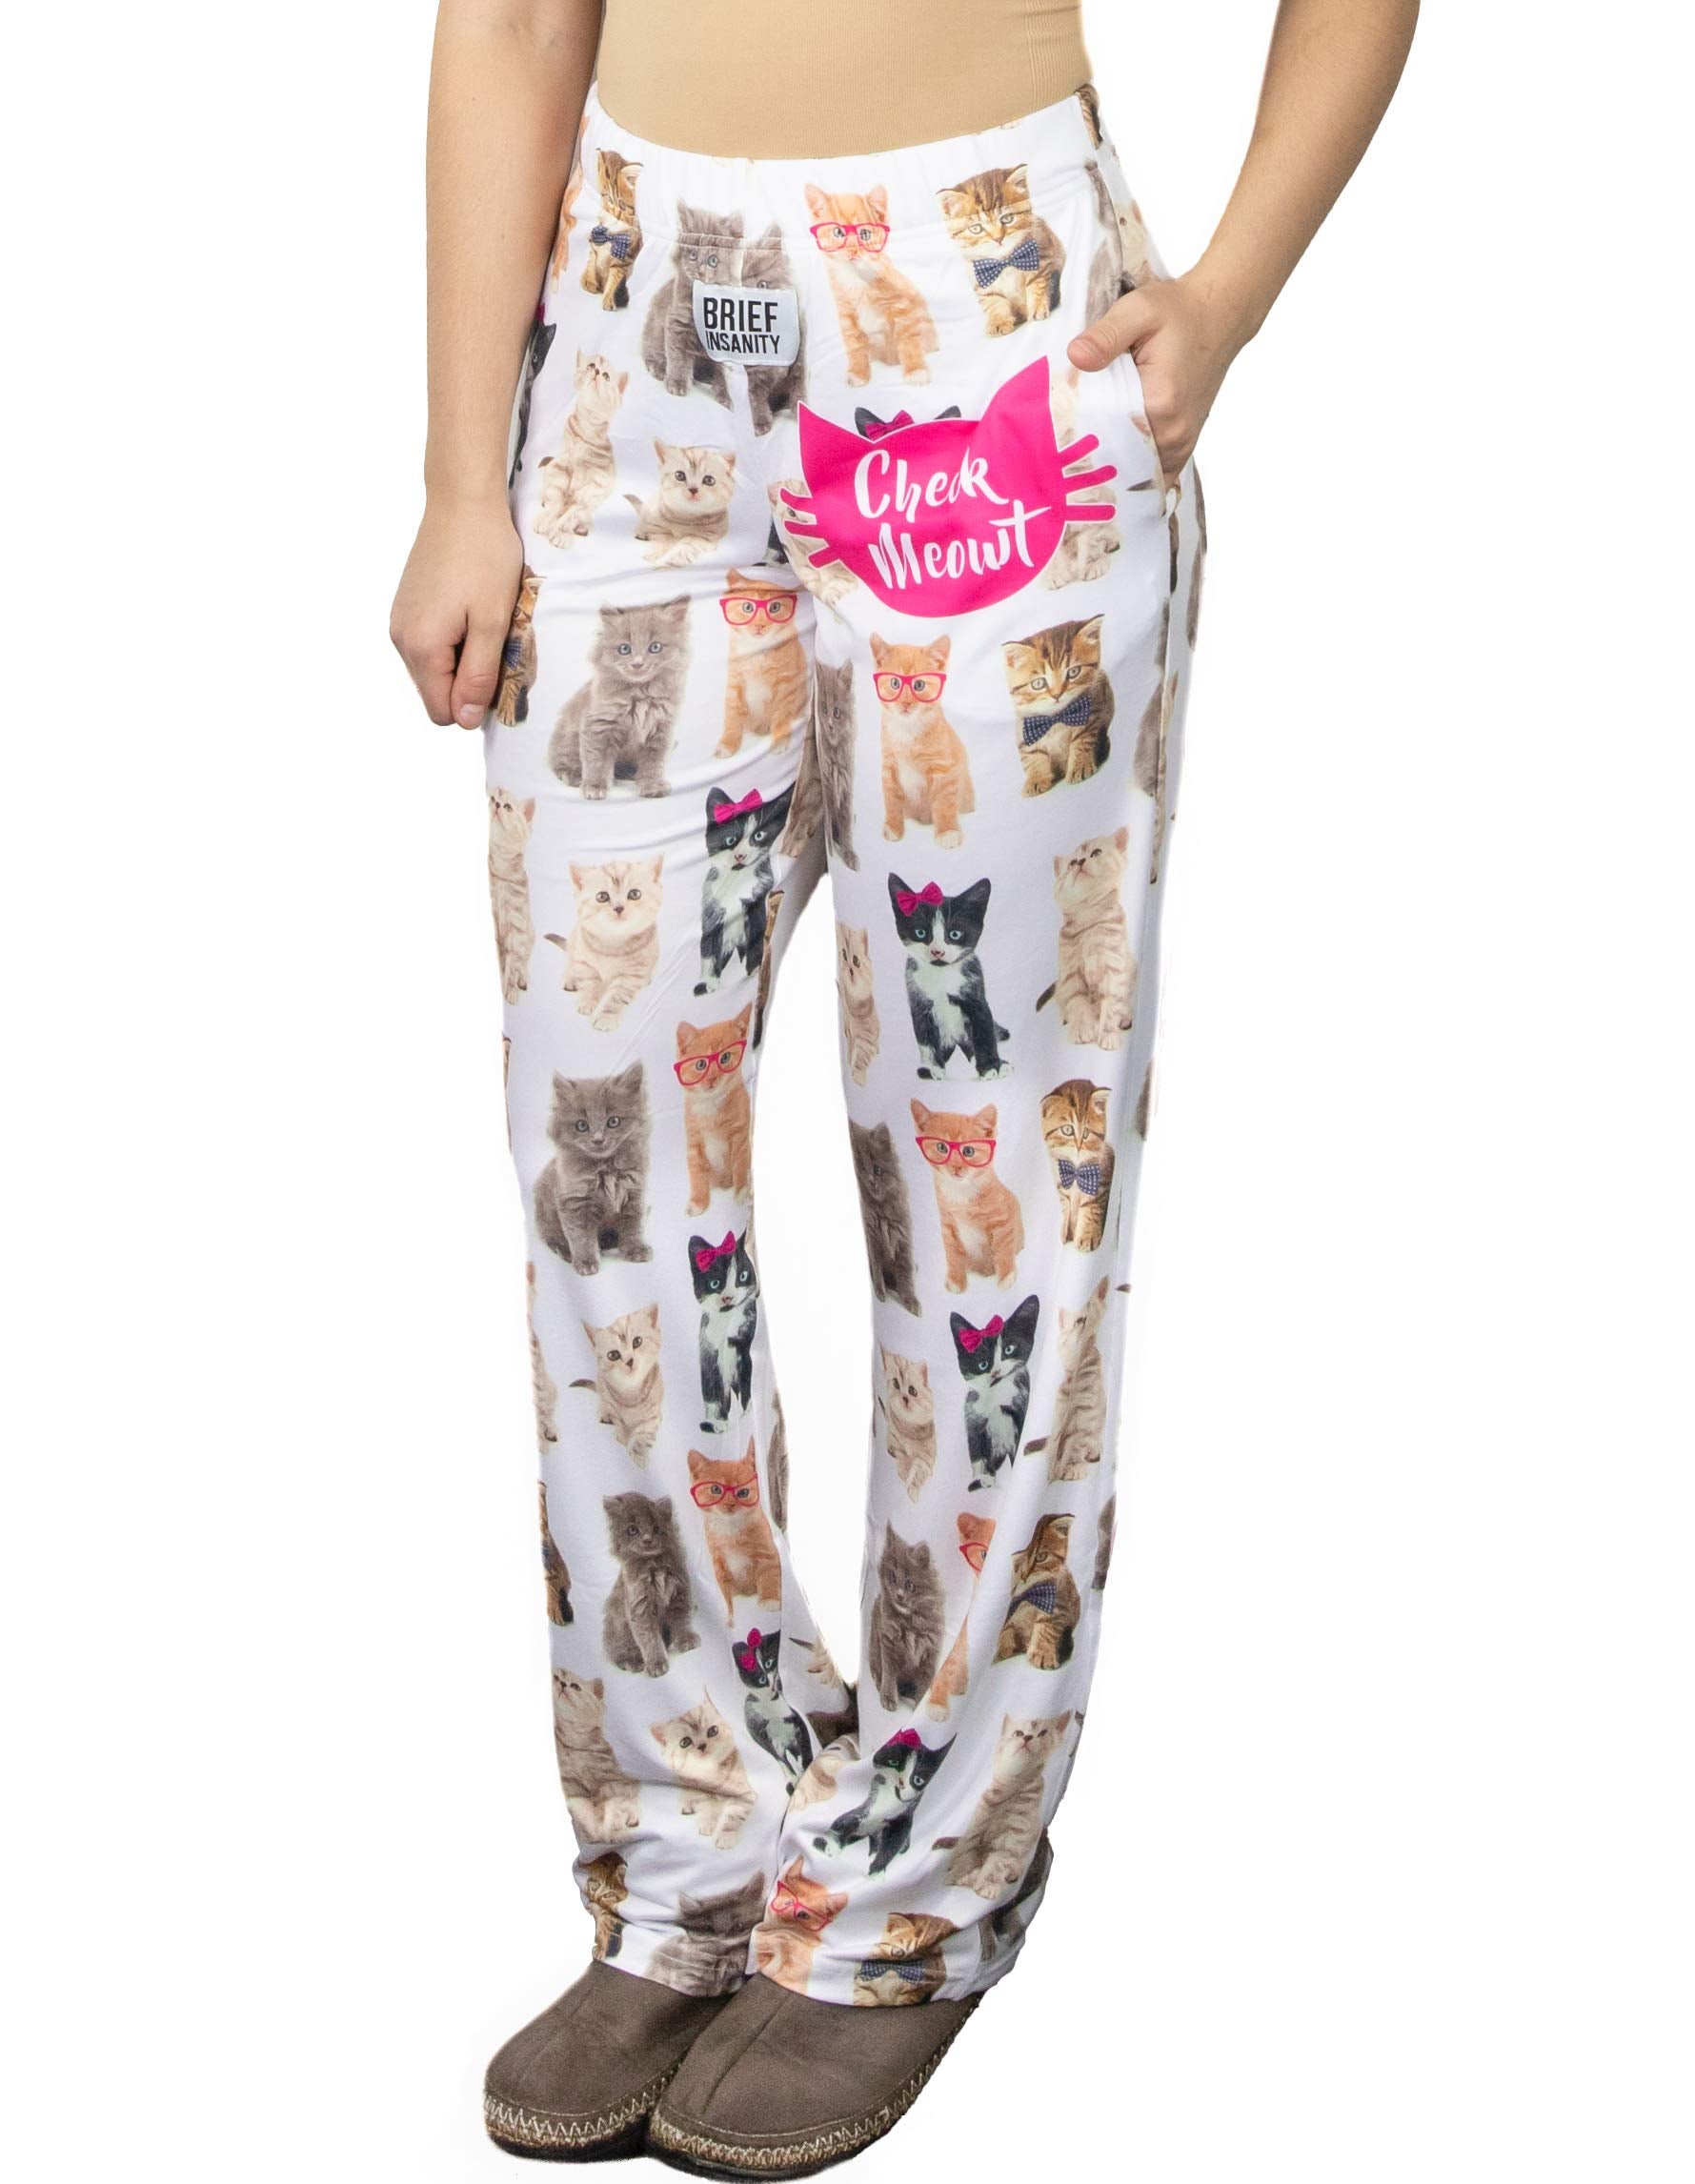 Waist down photo of model wearing Check Meowt pajama lounge pants front view (white background)